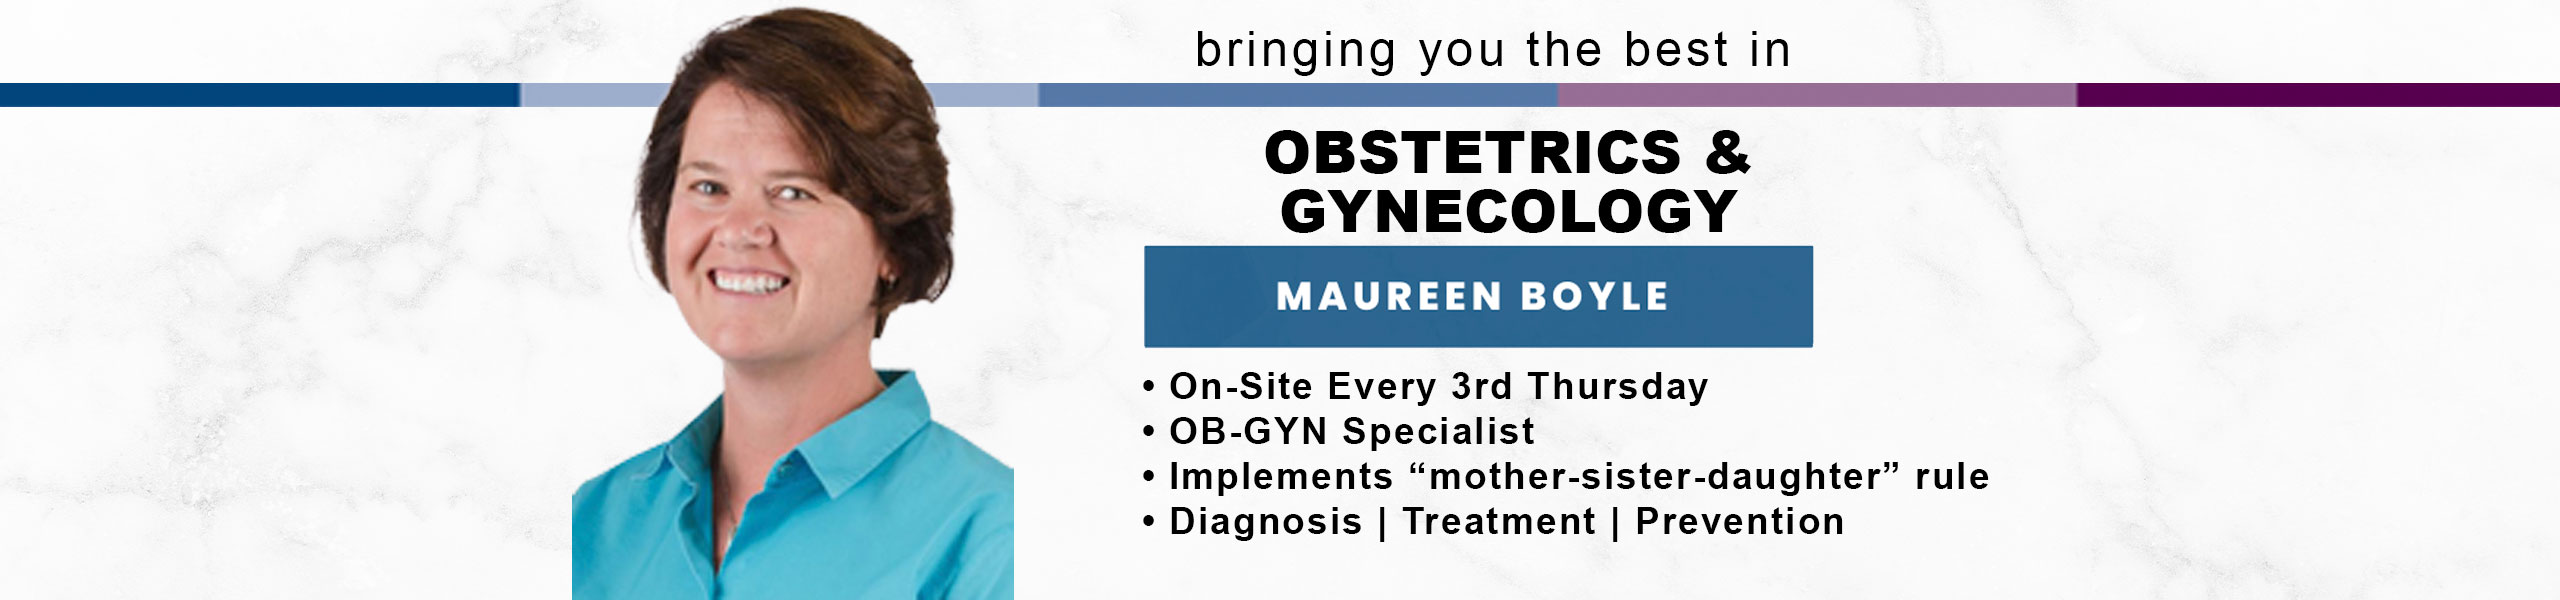 Photo of Provider. OBSTETRICS &
GYNECOLOGY.
On-Site Every 3rd Thursday
• OB-GYN Specialist
Implements “mother-sister-
daughter” rule
Diagnosis | Treatment | Prevention